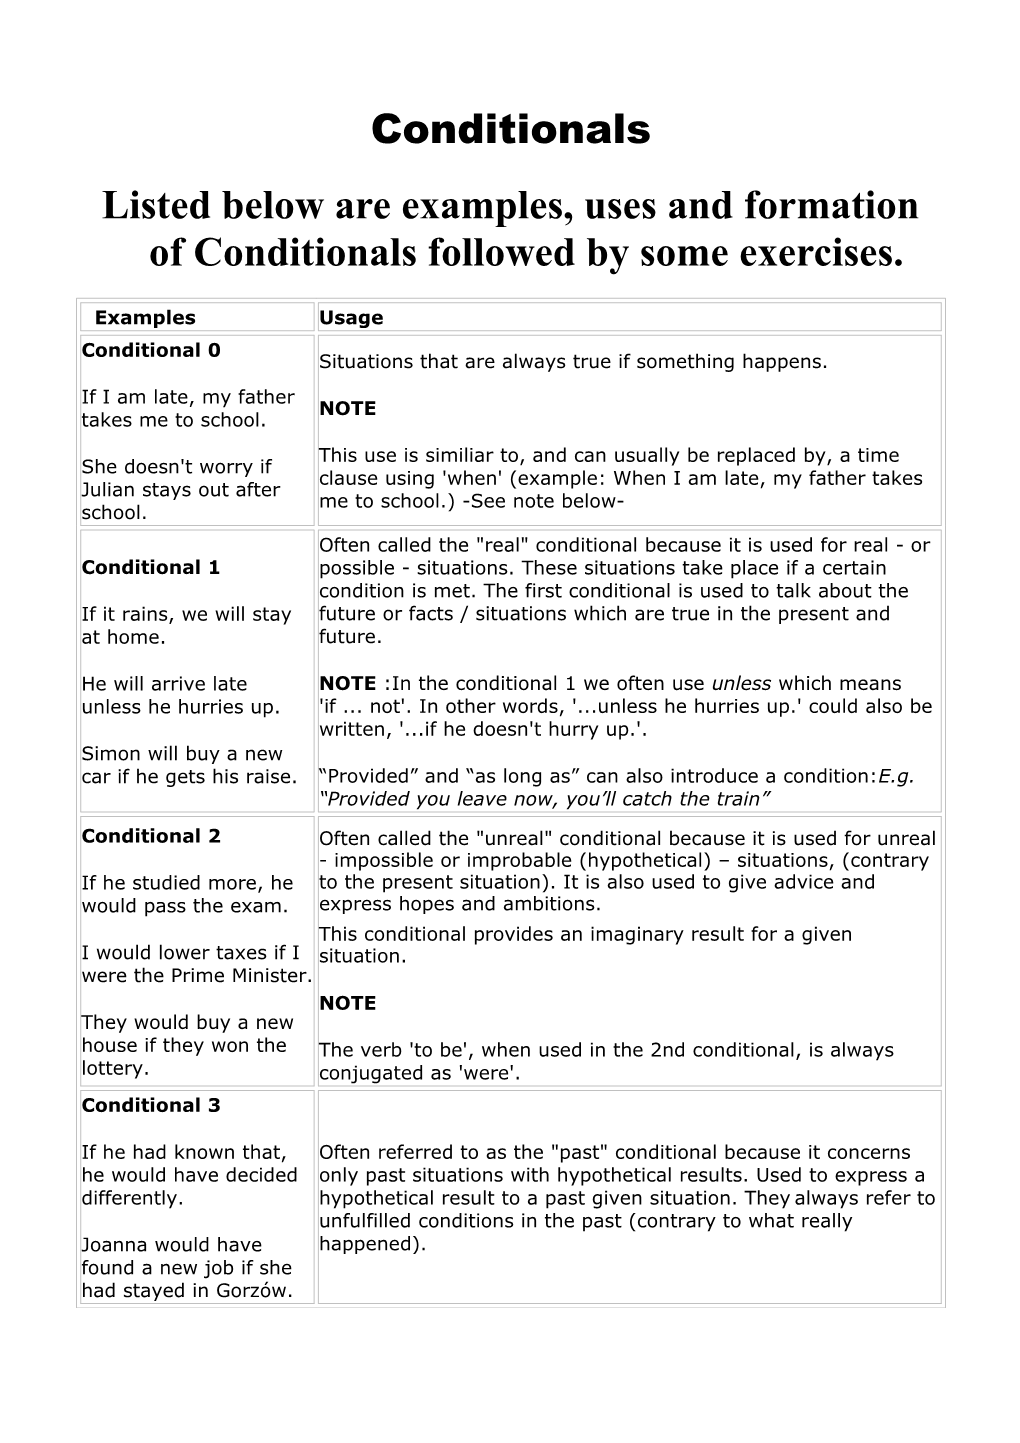 Listed Below Are Examples, Uses and Formation of Conditionals Followed by Some Exercises